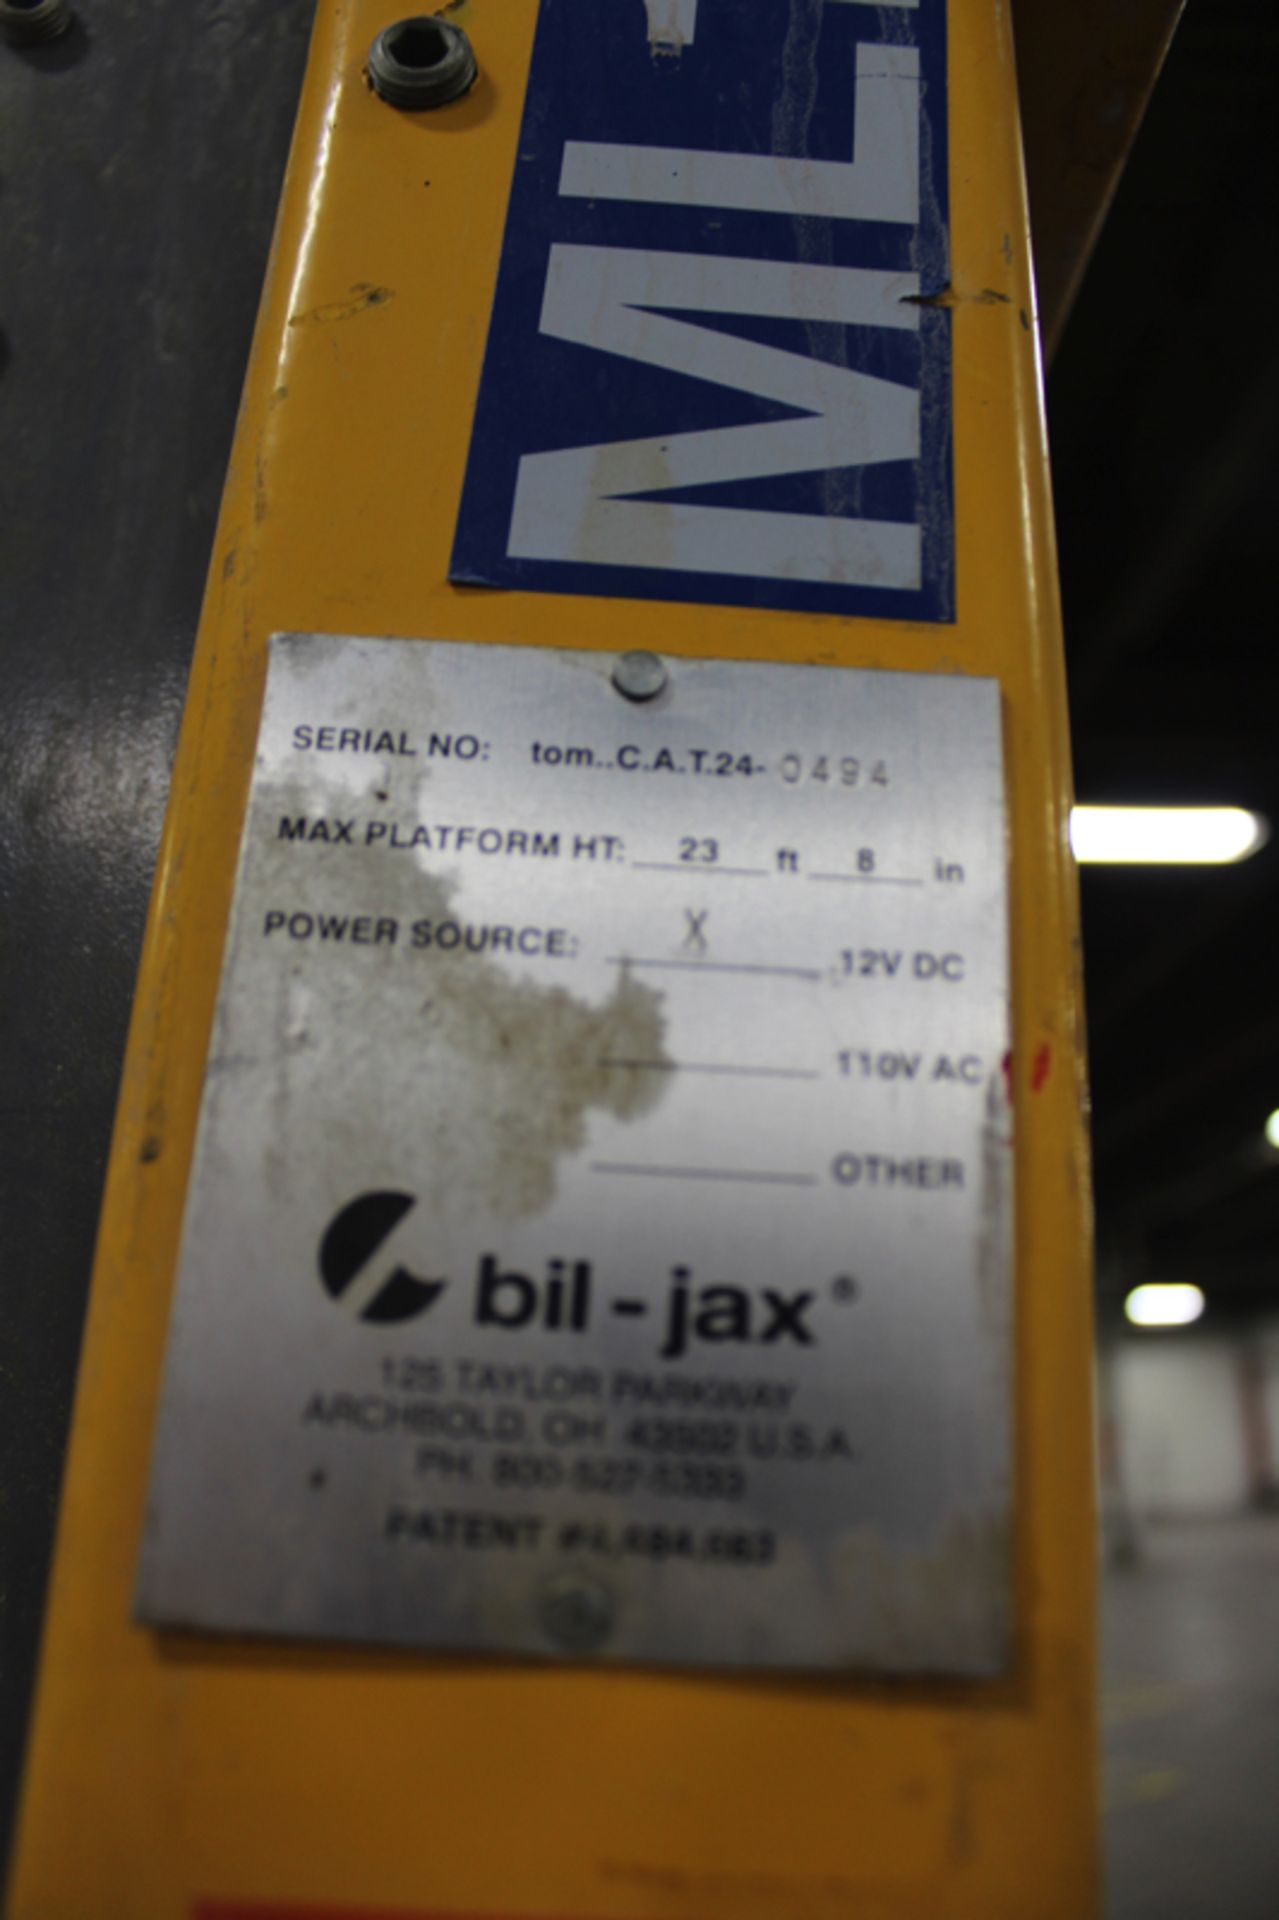 Bil-Jax Tom C.A.T 24 Electric Manlift, S/N 0494 (Location: Sonoco Warehouse) - Image 2 of 2